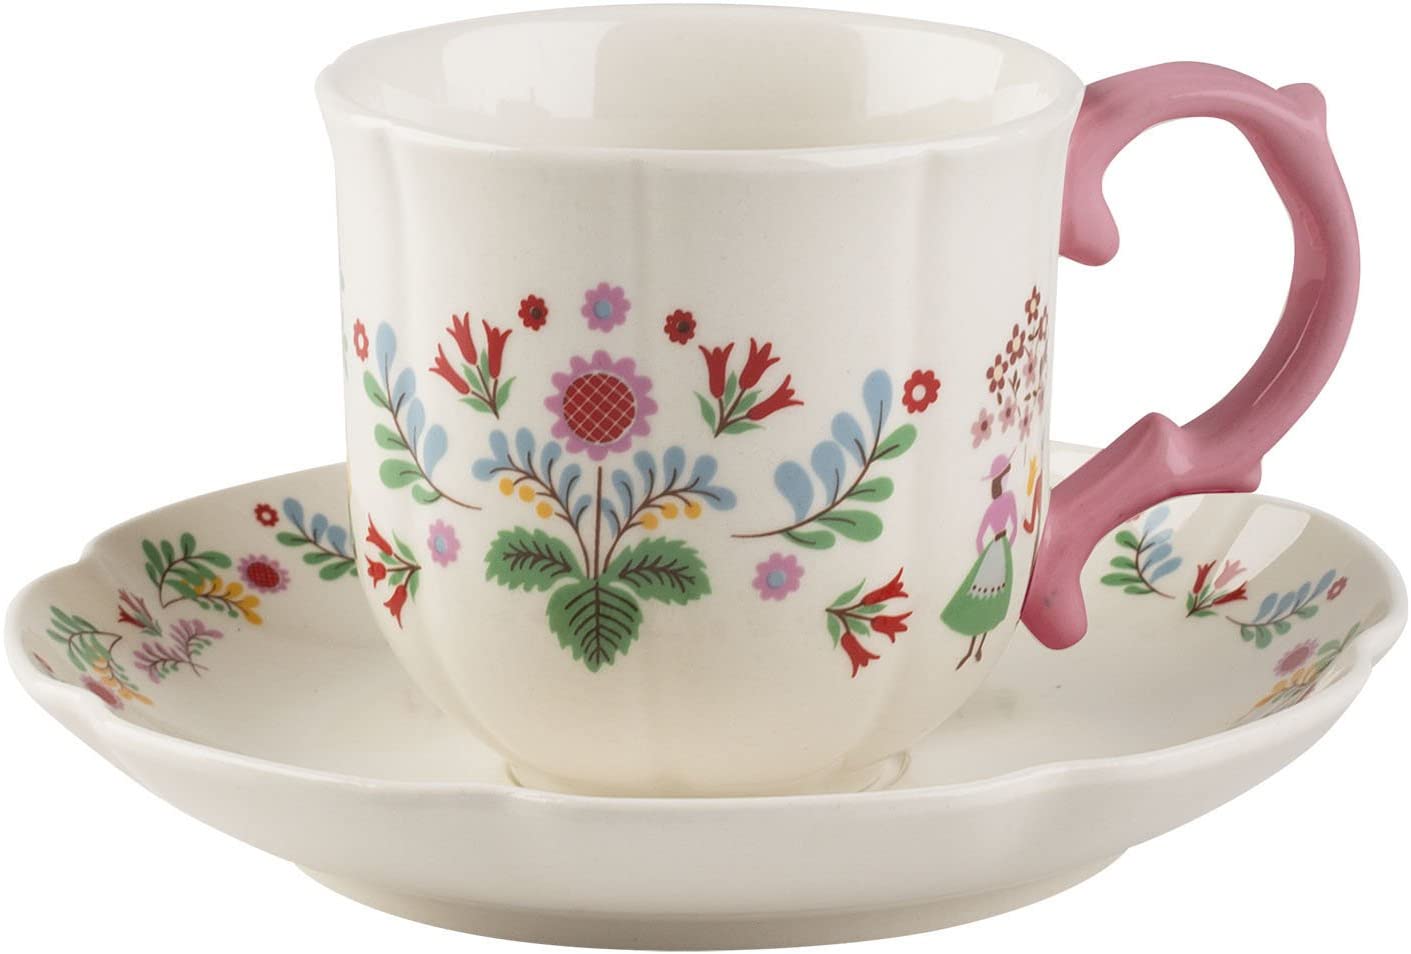 CREATIVE TOPS Katie Alice Festival Folk Breakfast Cup and Saucer